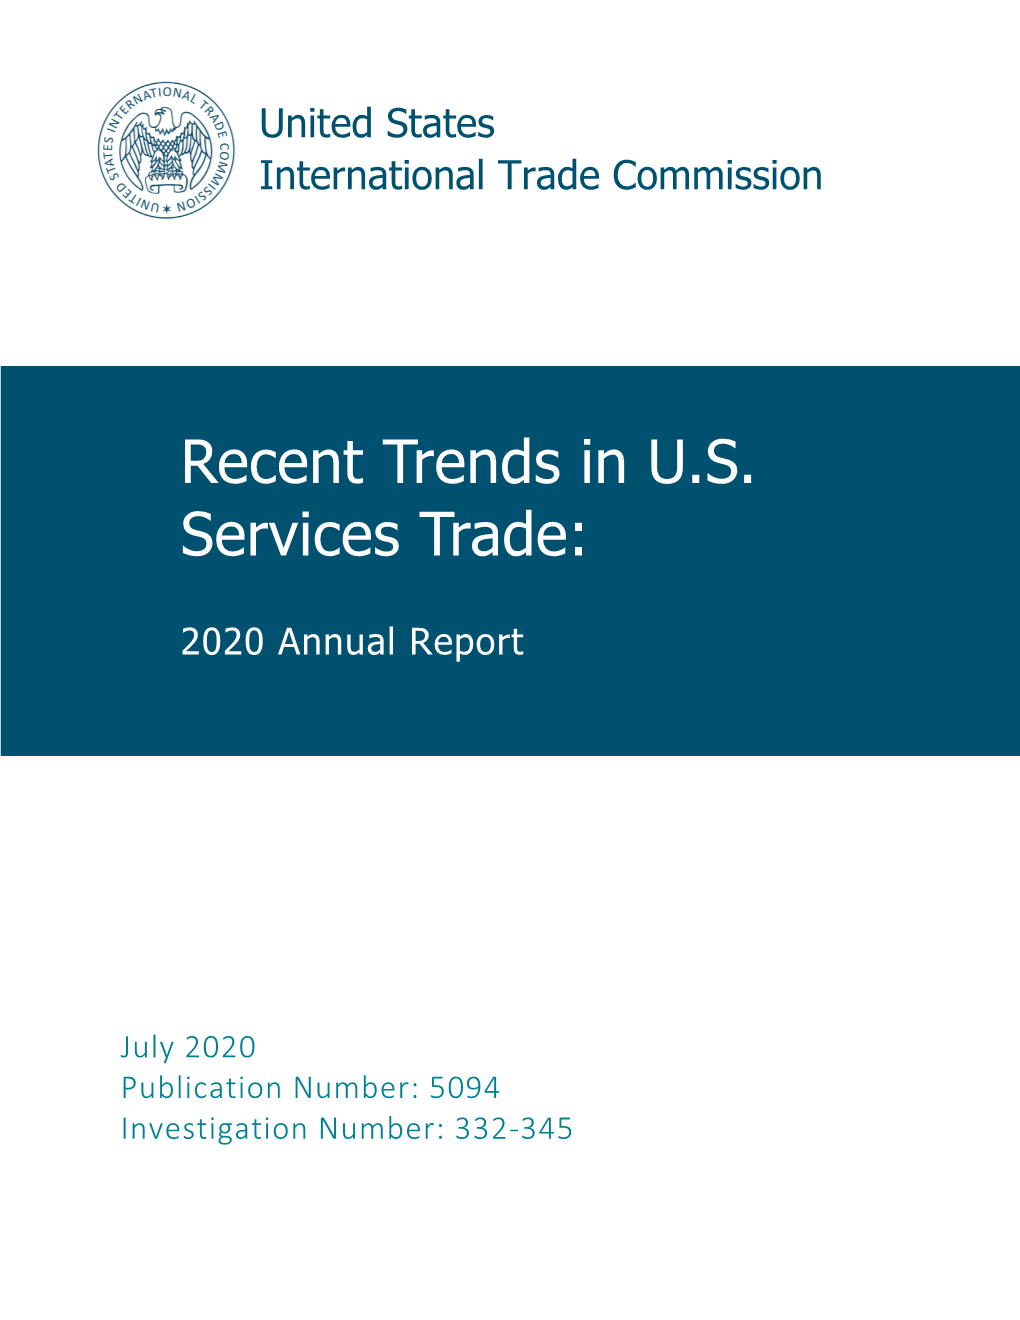 Recent Trends in U.S. Services Trade 2020 Annual Report